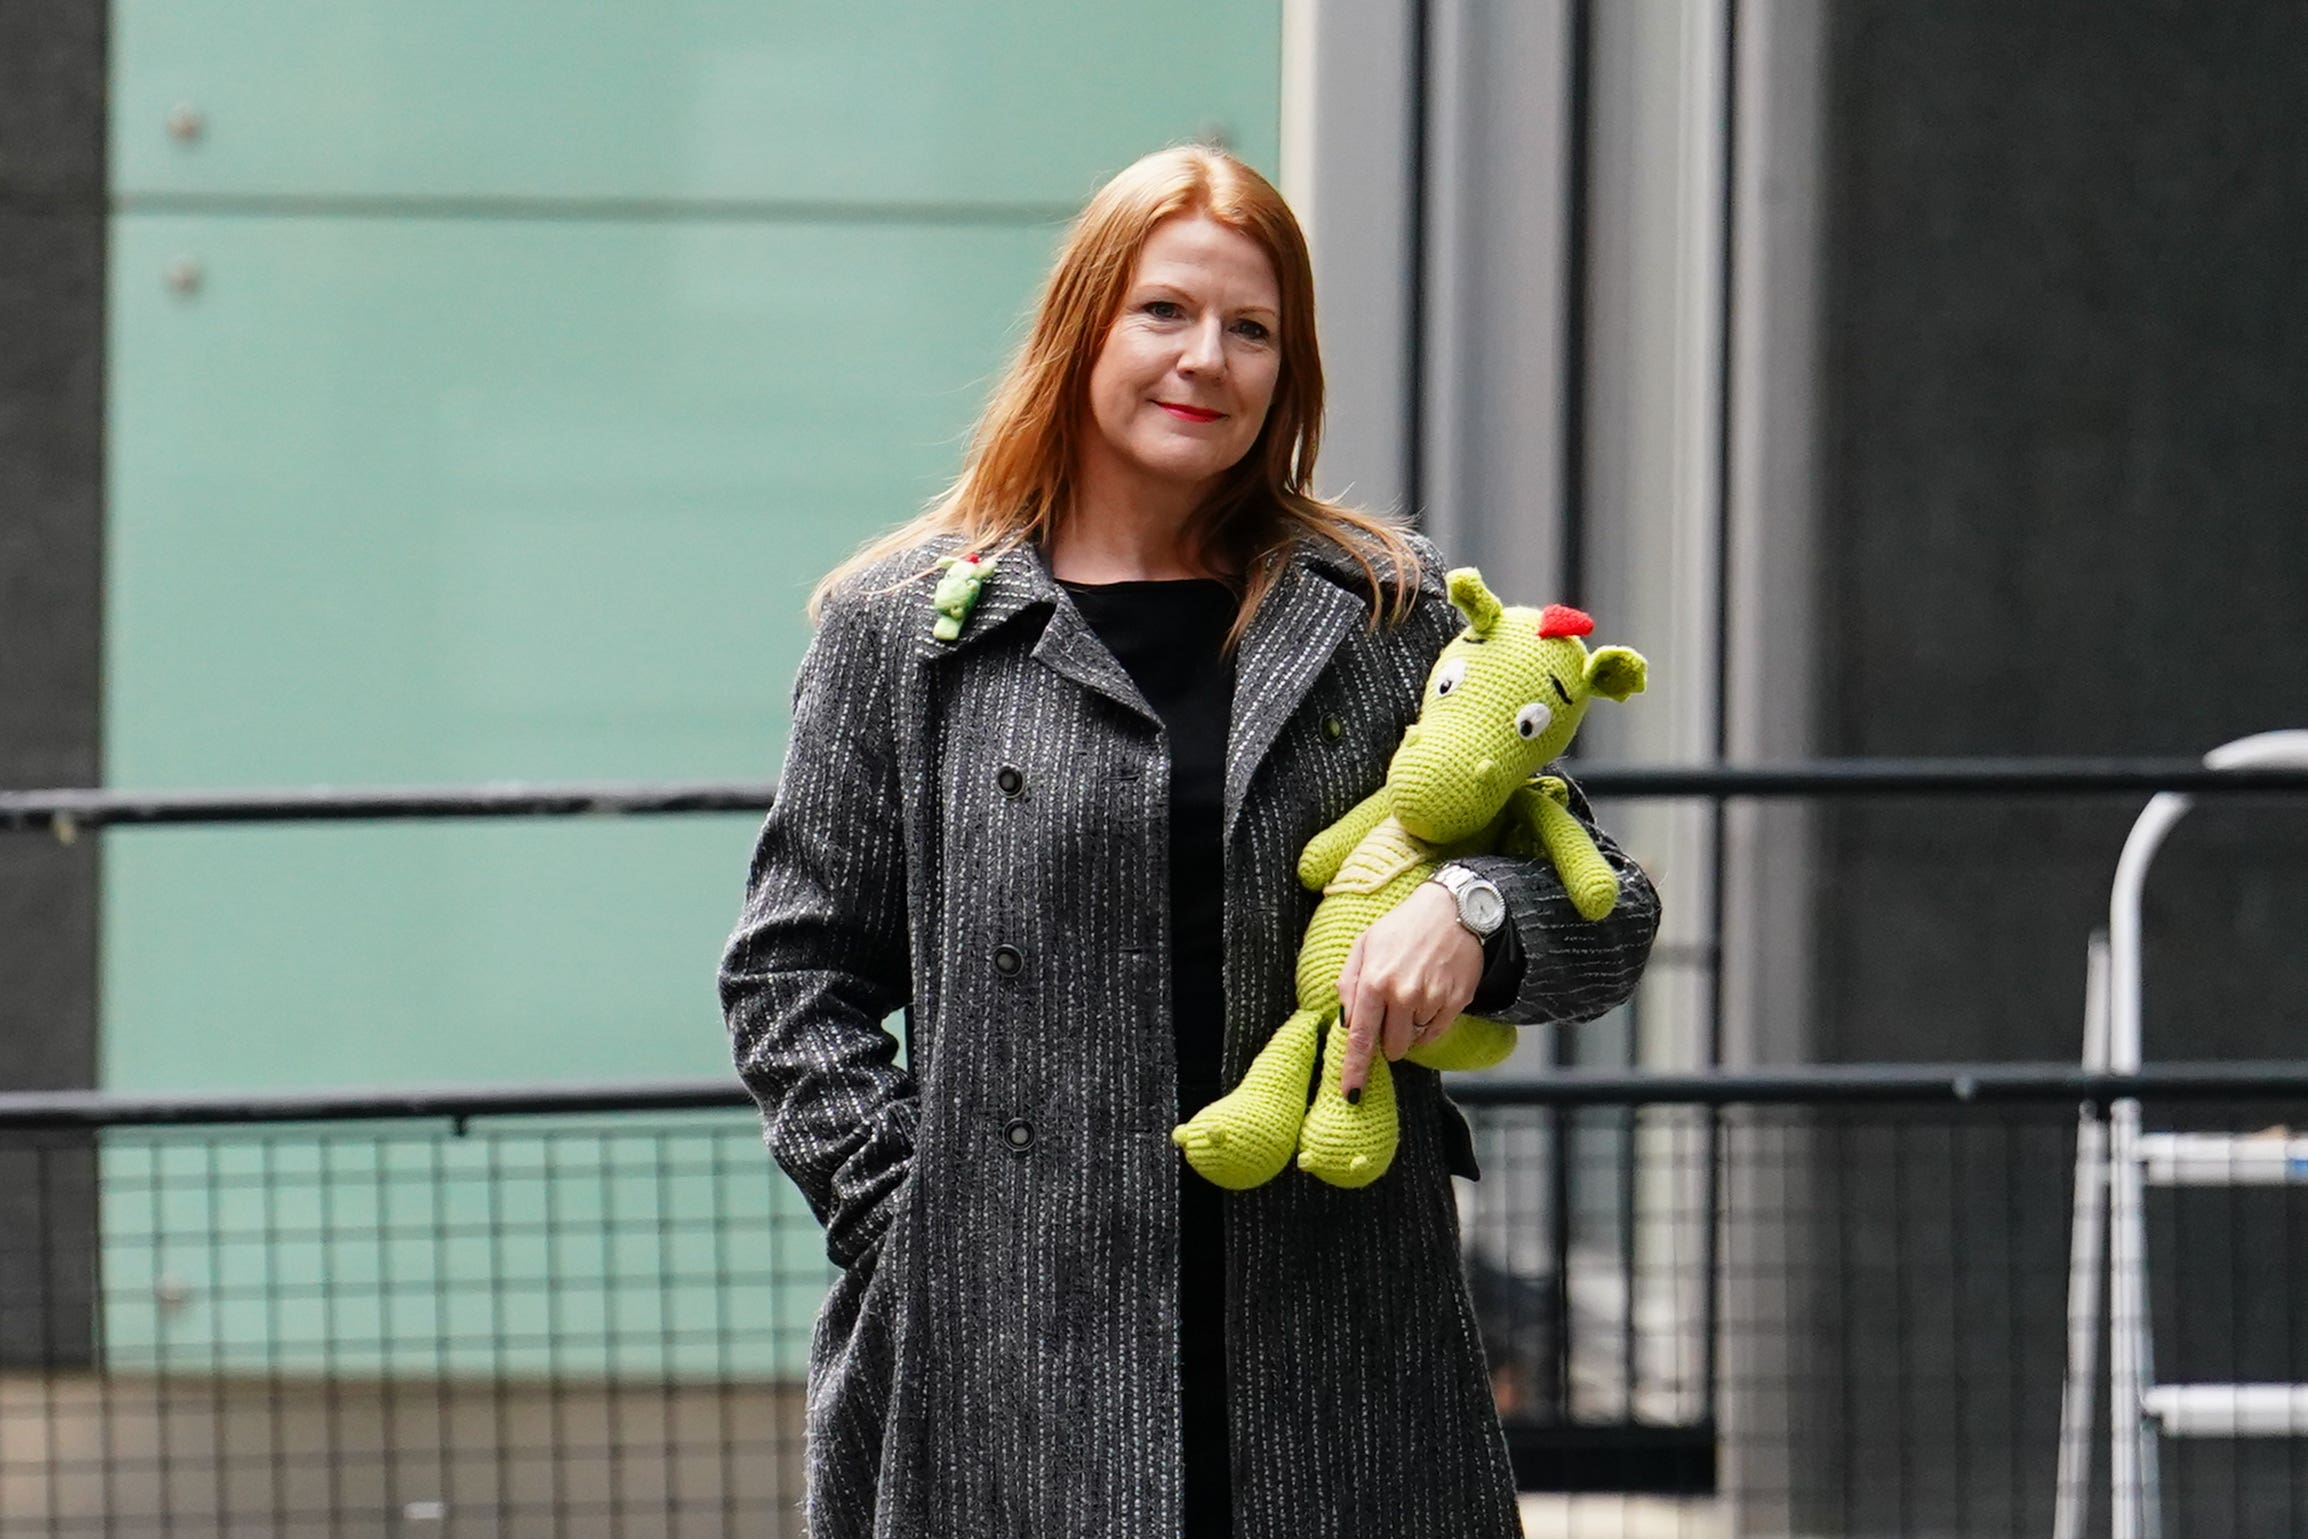 Children’s book author Fay Evans who claimed John Lewis had infringed her copyright in its Christmas advert about an excitable dragon has lost her High Court case (Jordan Pettitt/PA)